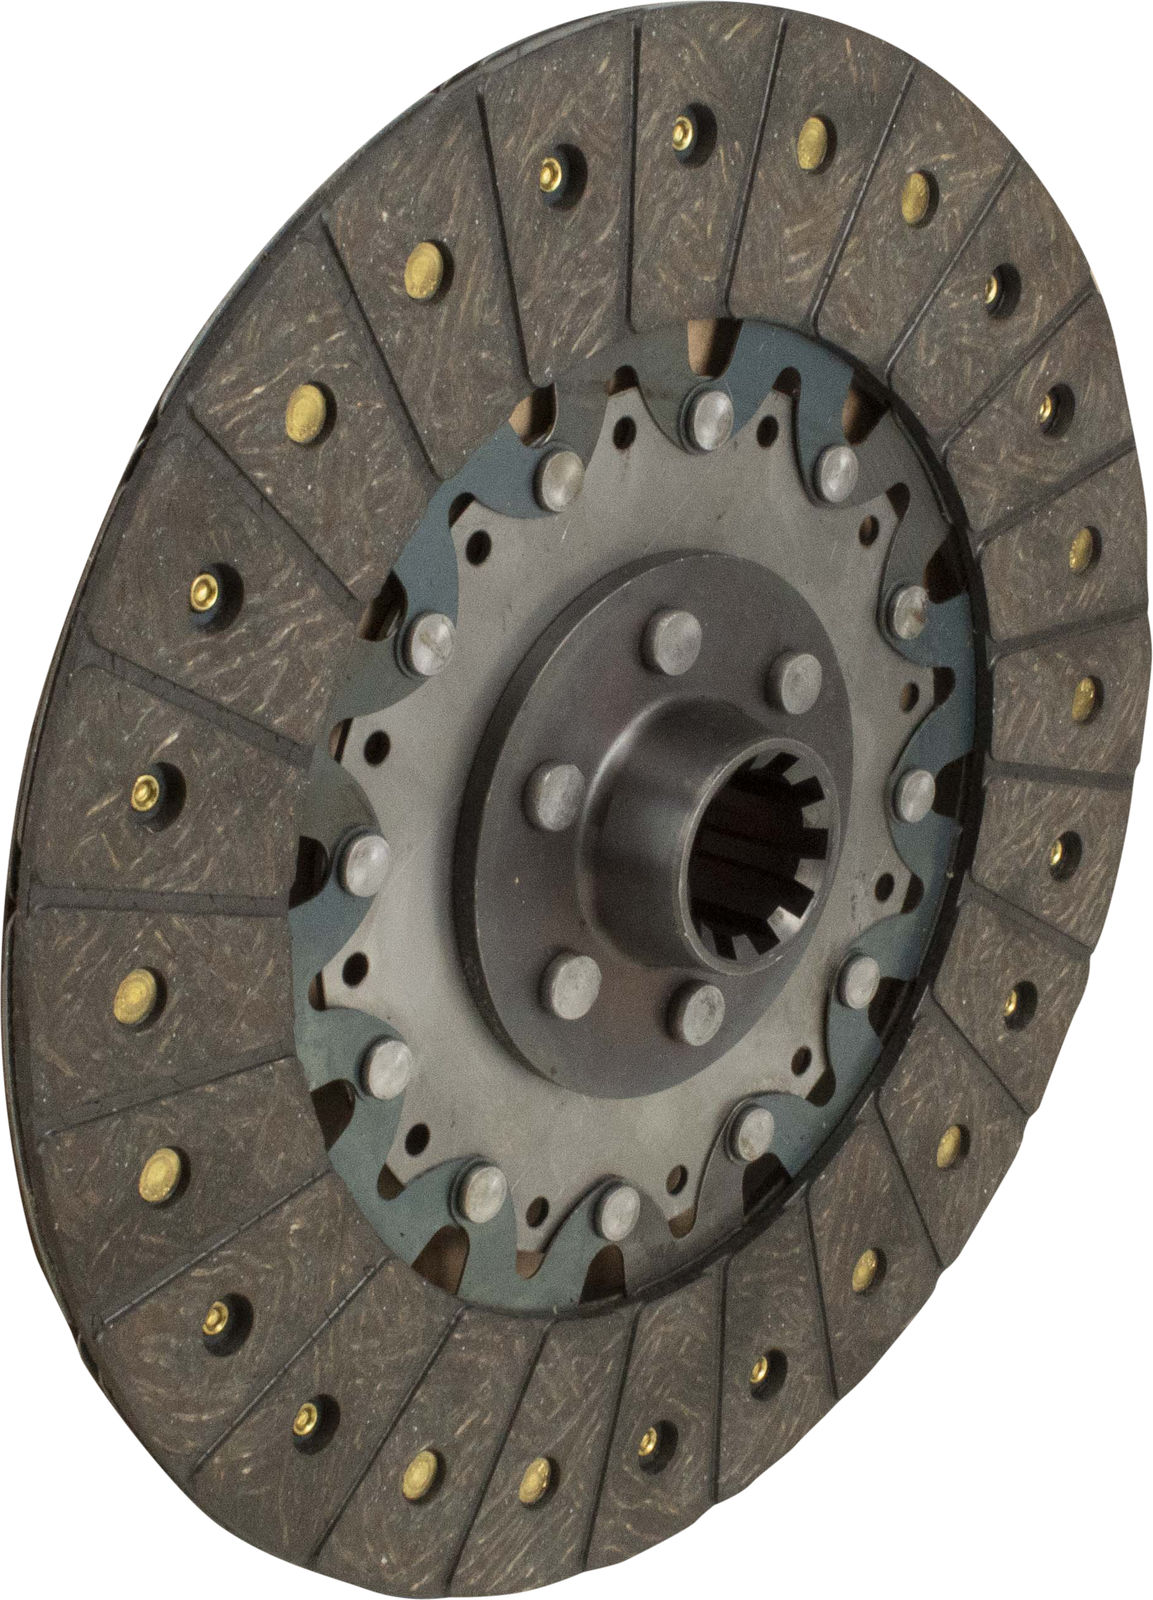 gas AT141684 10" TRANSMISSION CLUTCH DISC for JOHN DEERE TRACTOR 1010 2010 